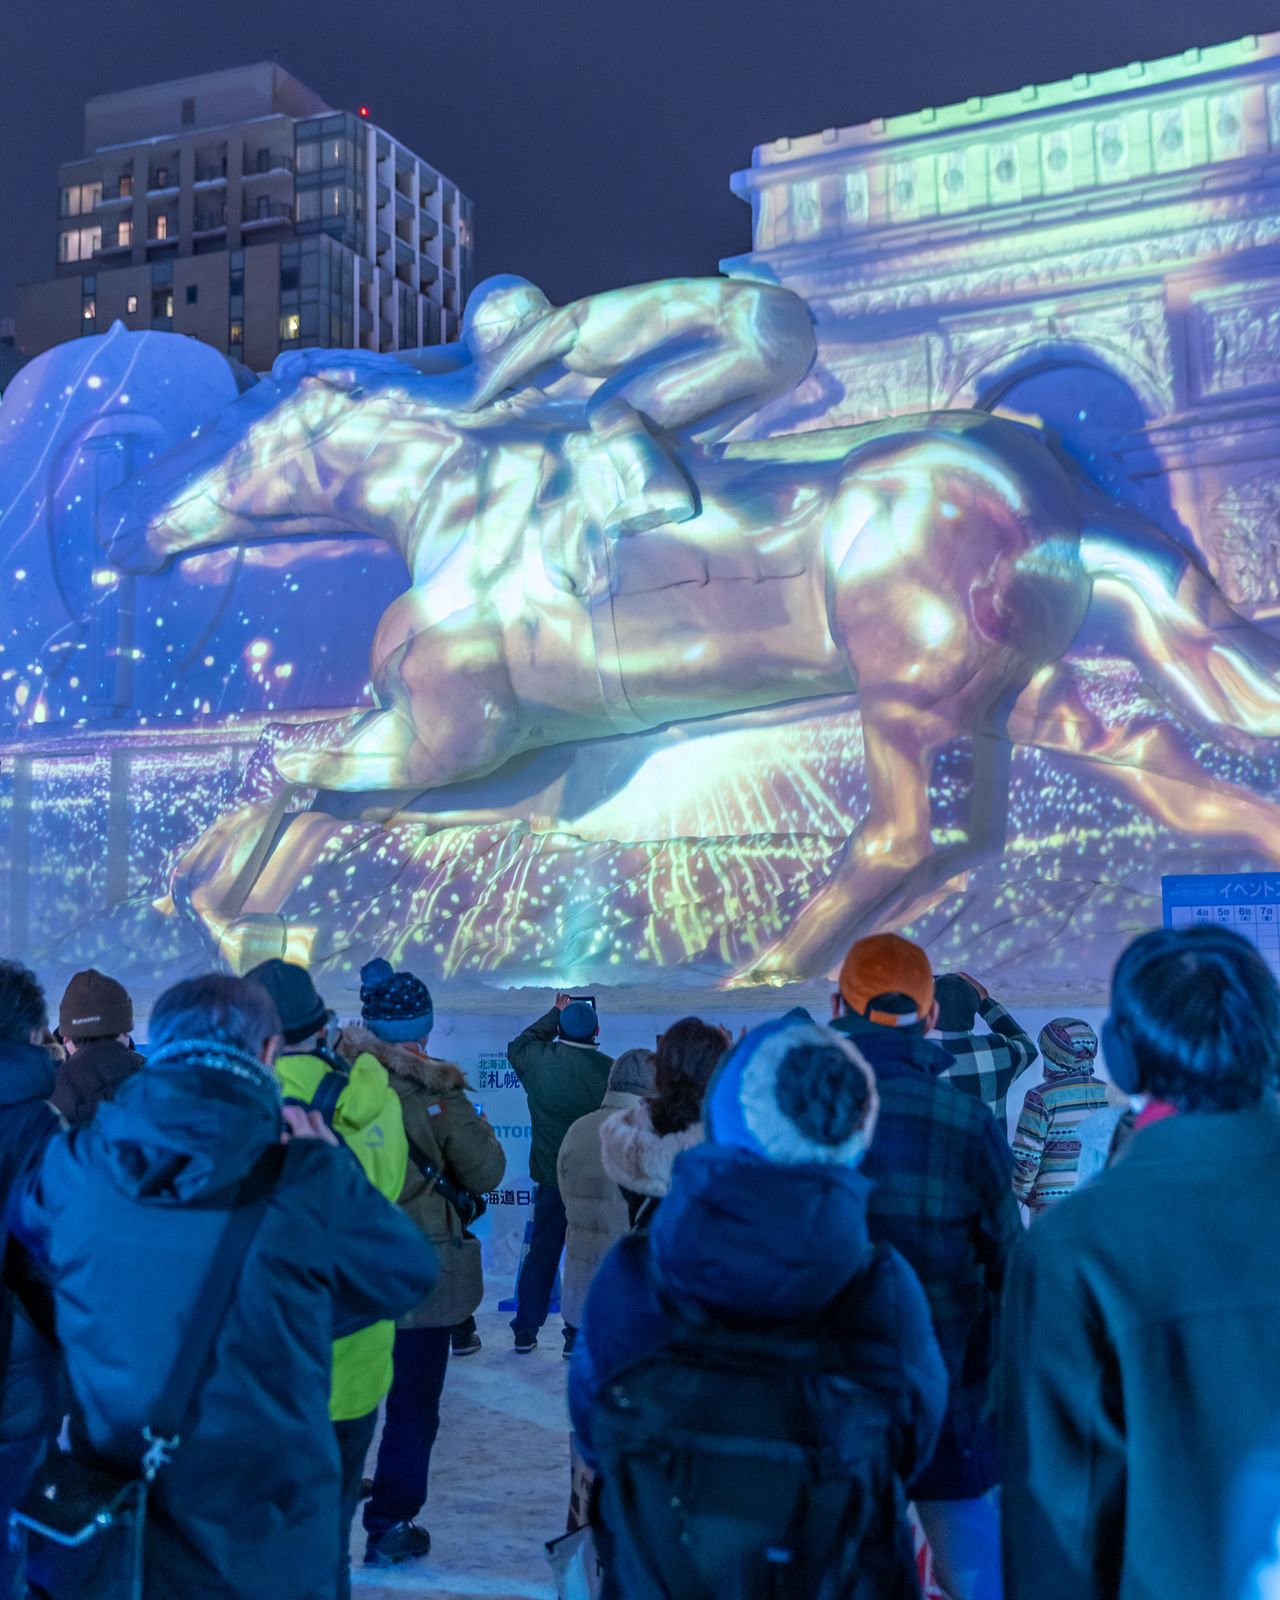 Fantastically carved and illuminated snow and ice sculptures draw crowds to the annual Sapporo Snow Festival, here seen in February 2020. (© Pixta)